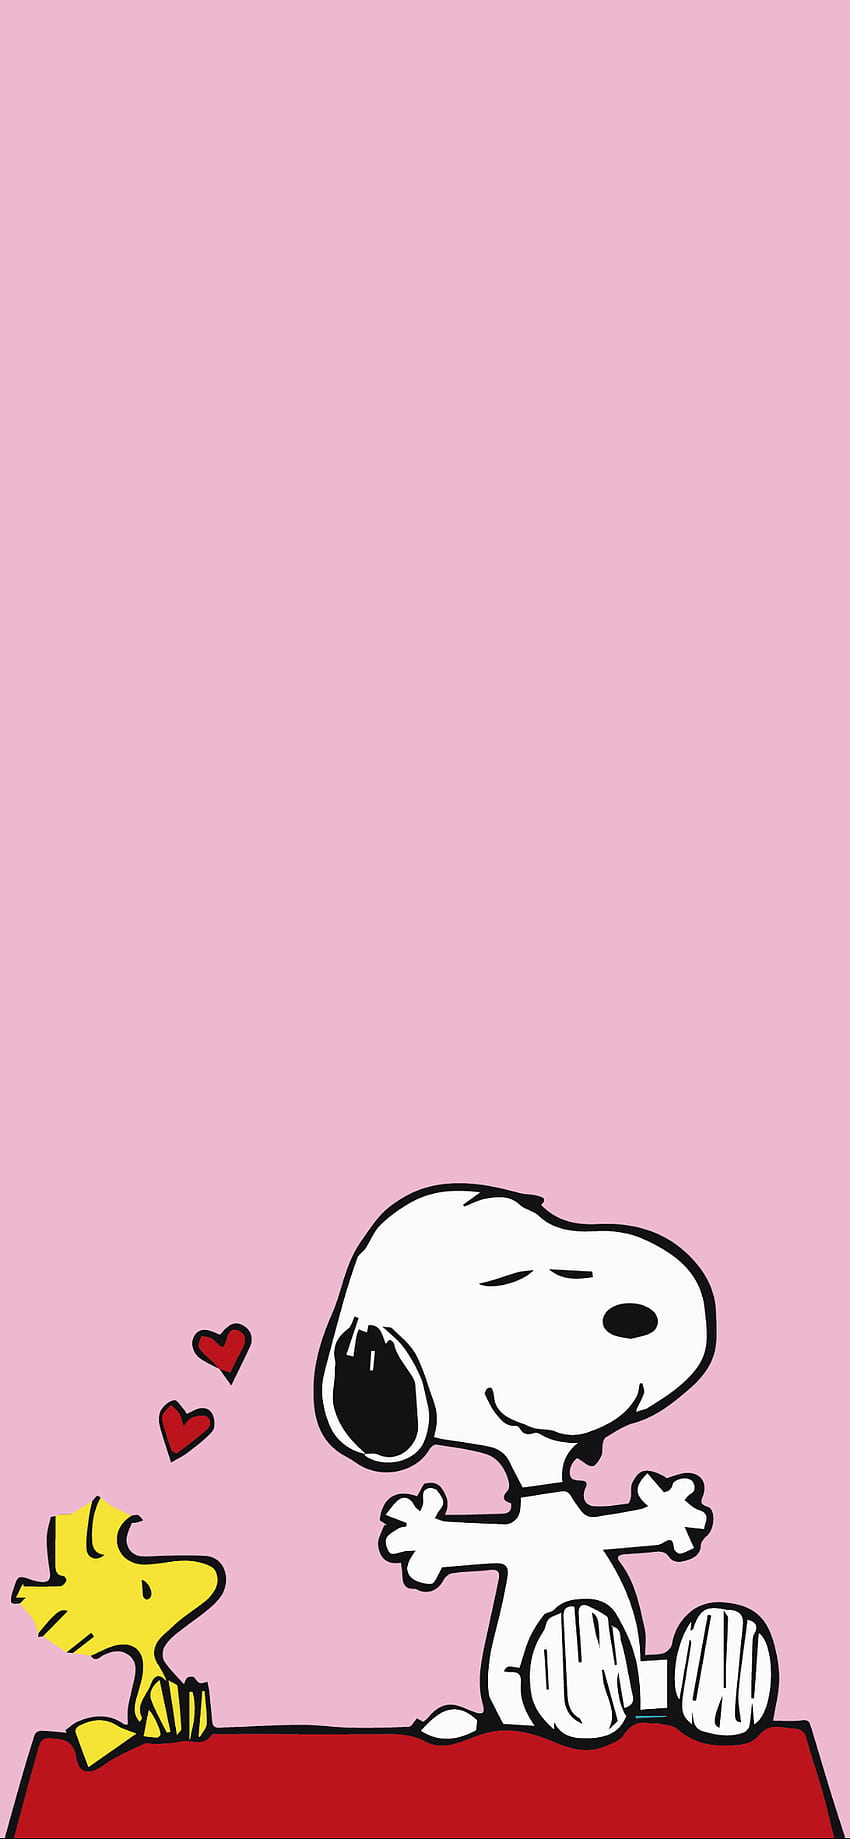 Snoopy and woodstock sitting on a bed with hearts - Charlie Brown